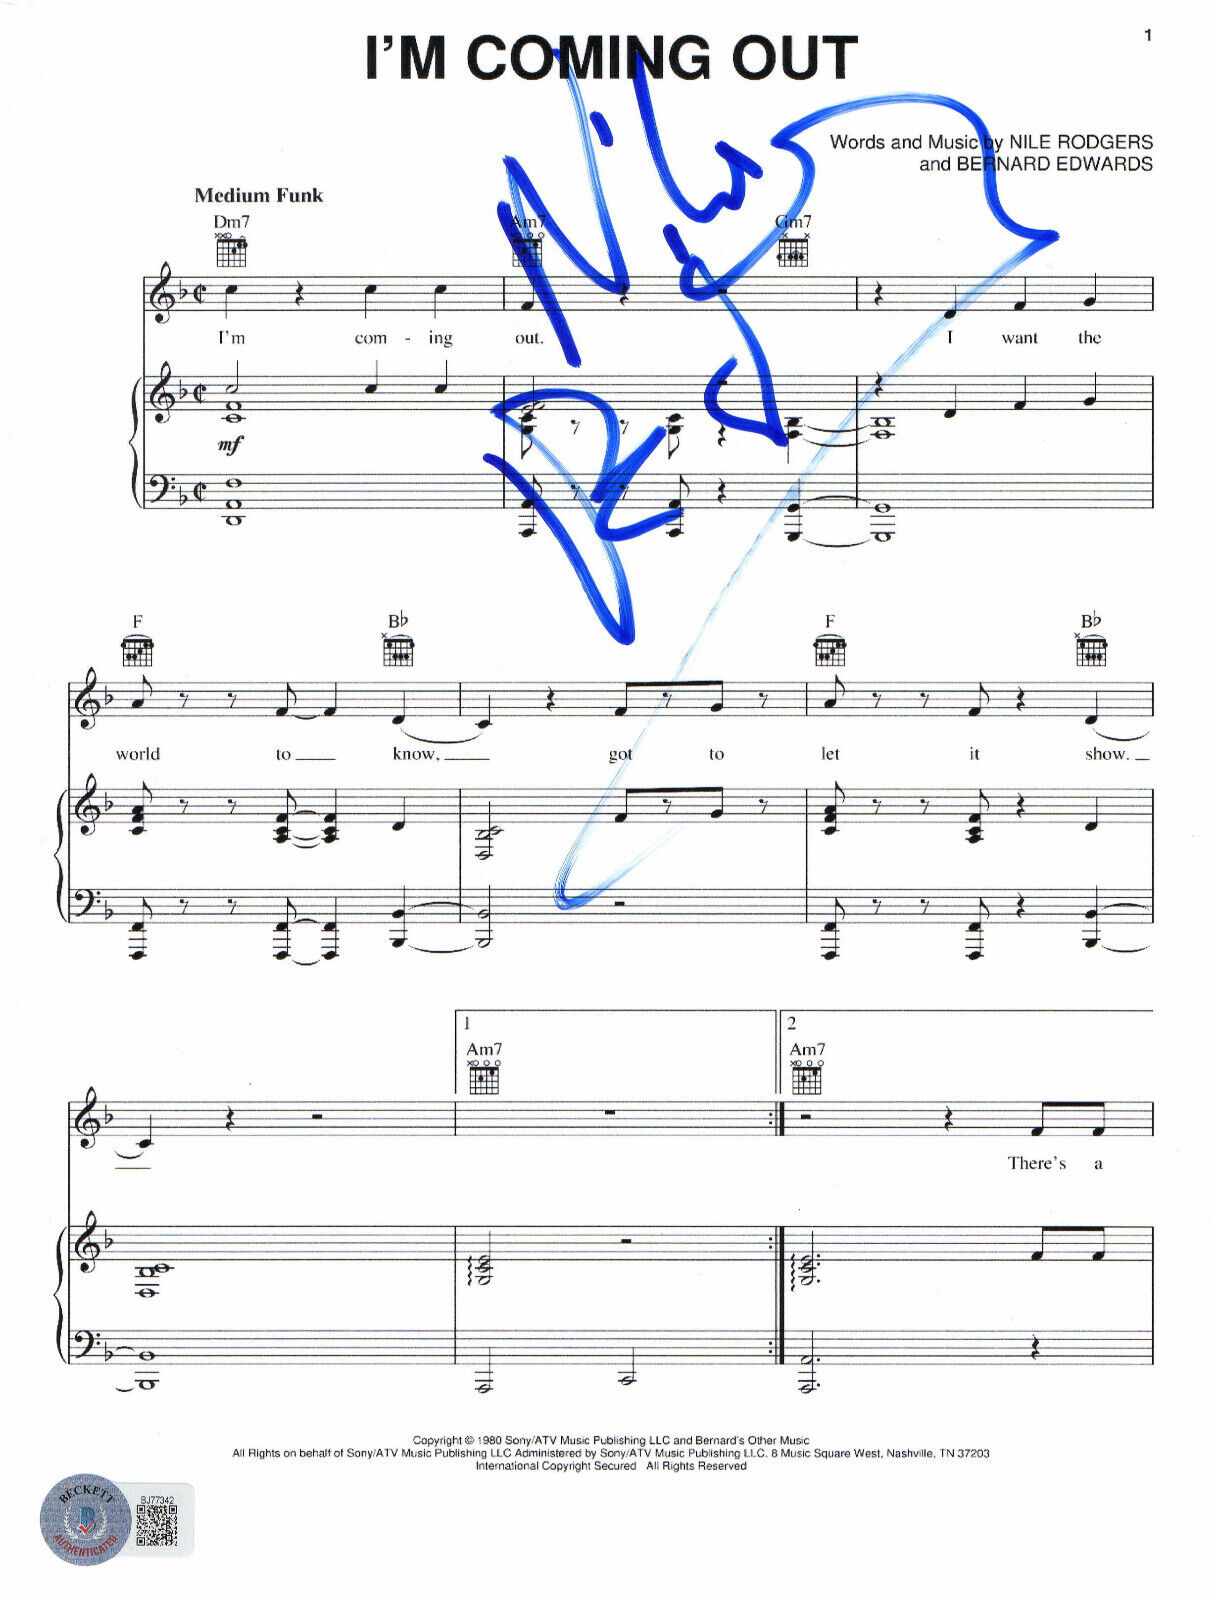 NILE RODGERS SIGNED AUTOGRAPH I'M COMING OUT MUSIC SHEET BECKETT BAS CHIC